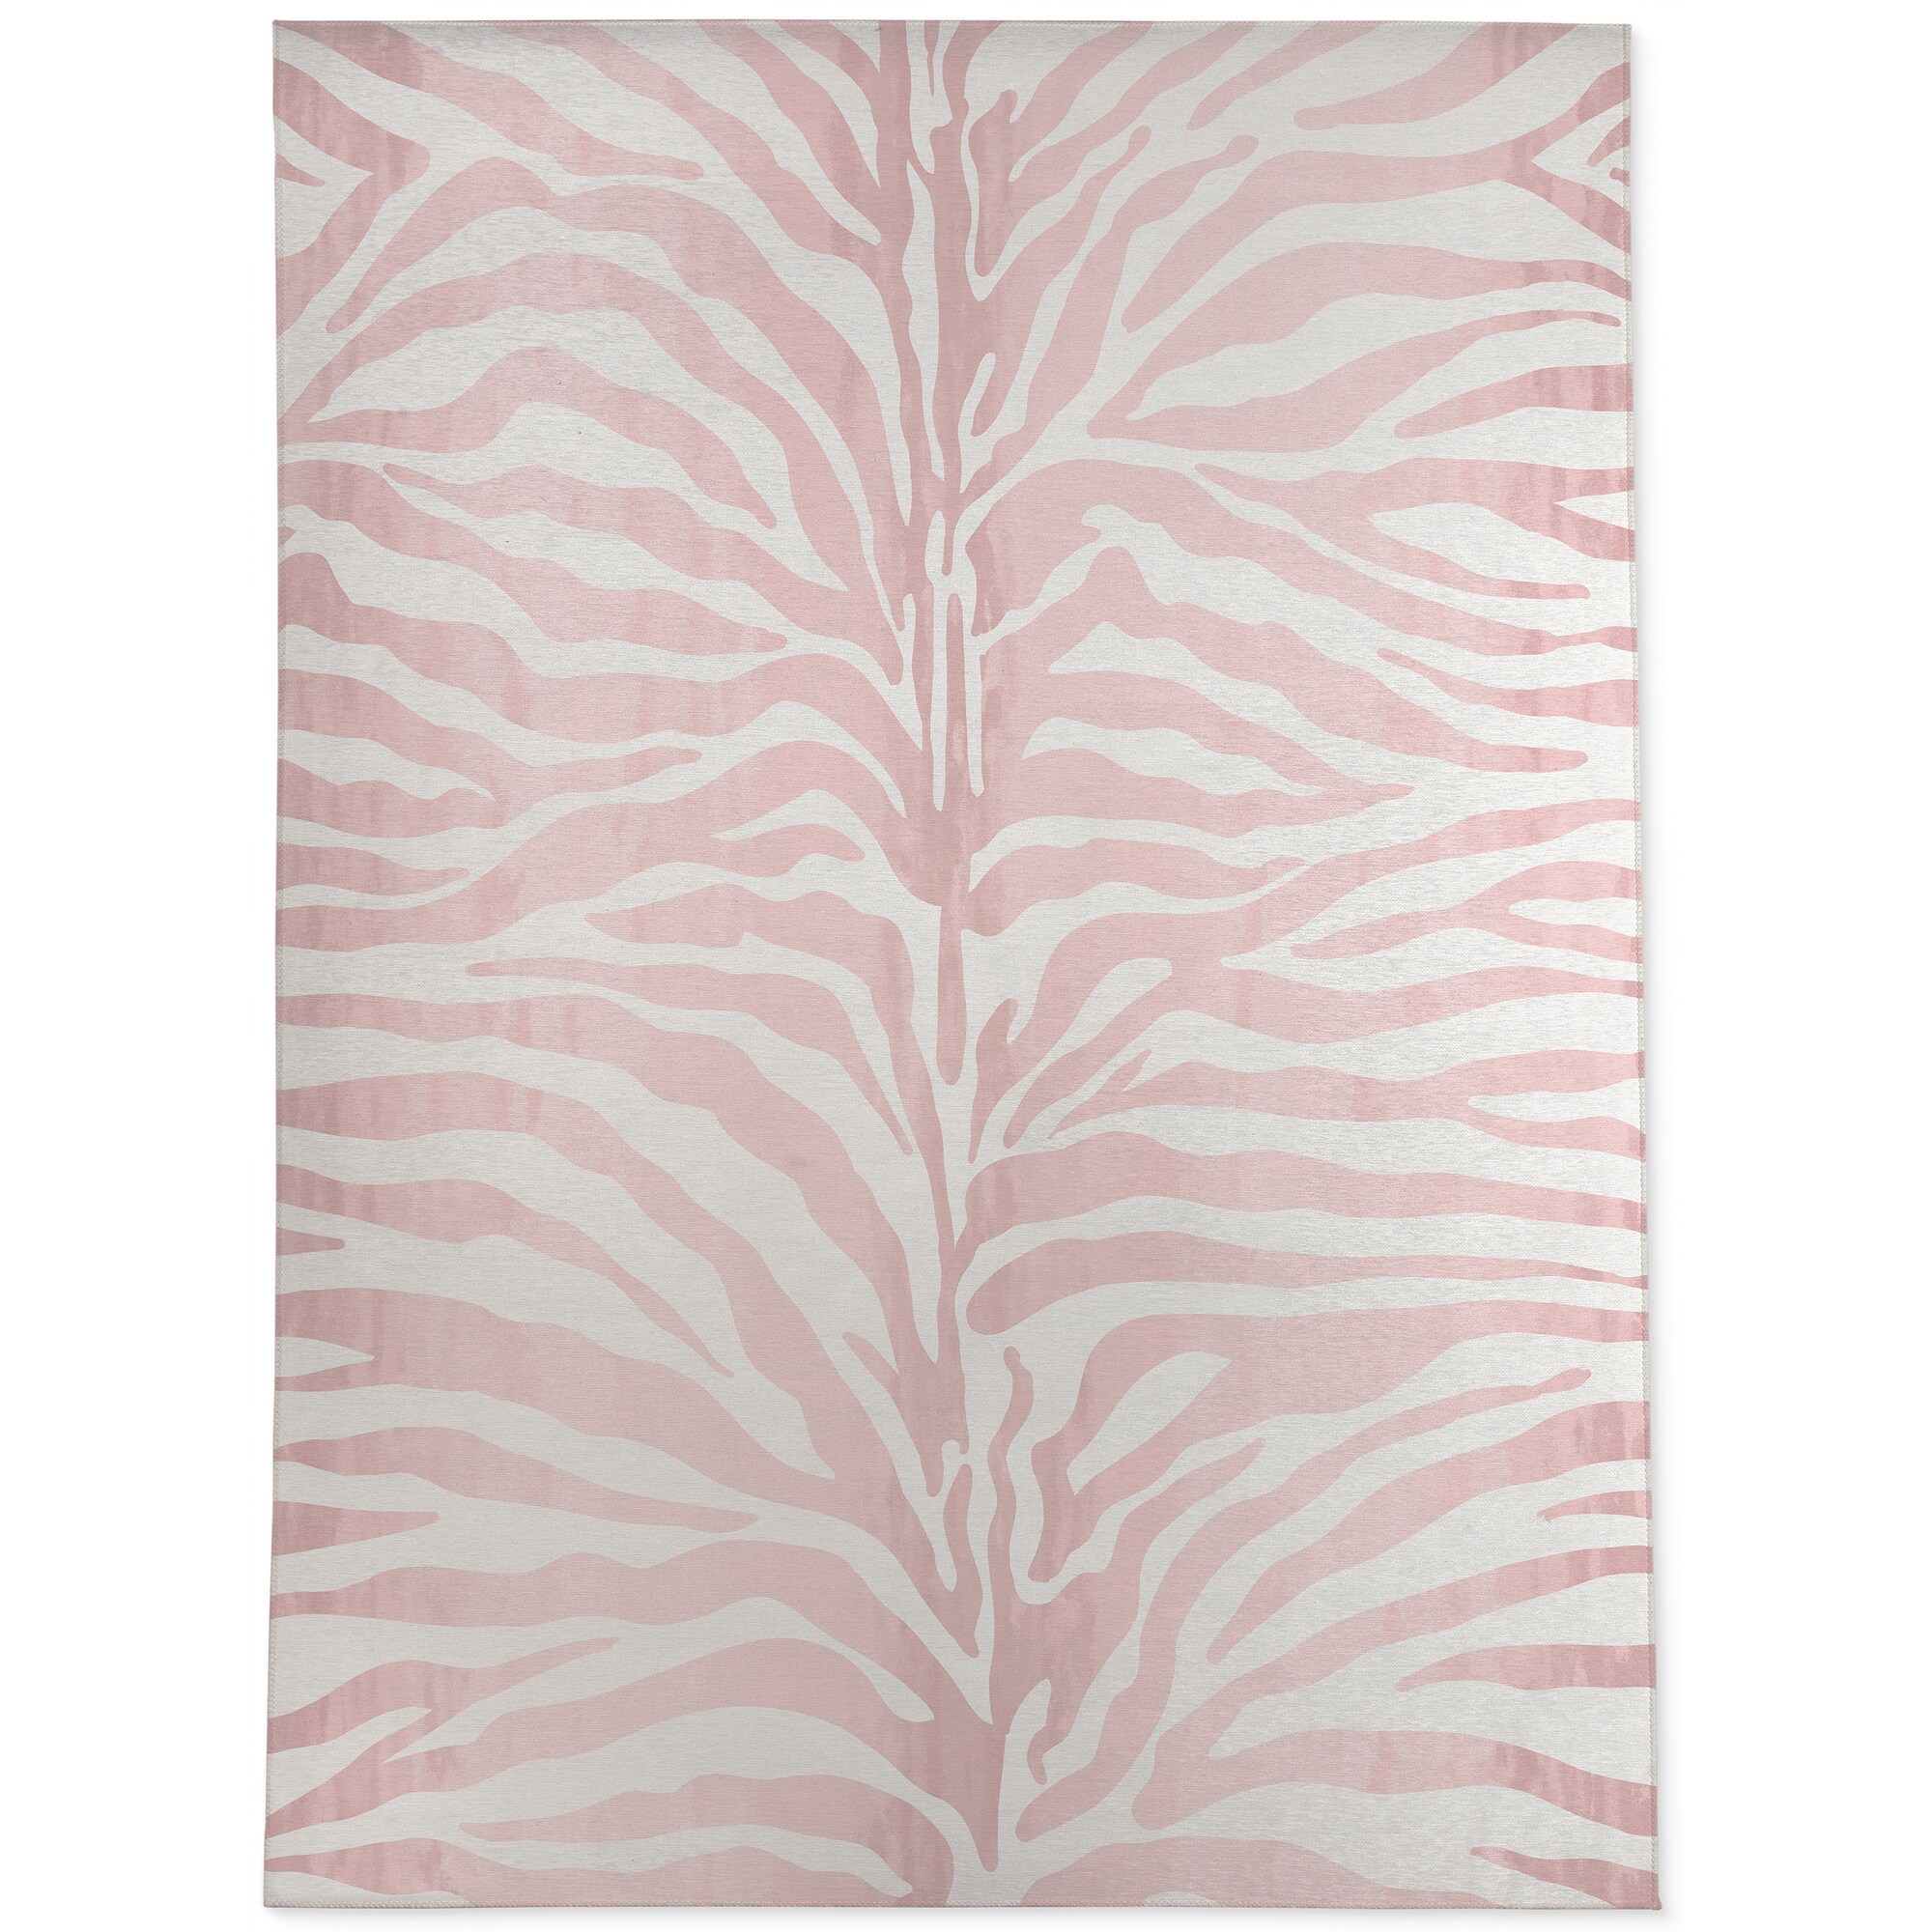 https://ak1.ostkcdn.com/images/products/is/images/direct/6a68e701bf0da29f0ef54be898dee6d6af085f68/ZEBRA-PINK-Area-Rug-By-Kavka-Designs.jpg